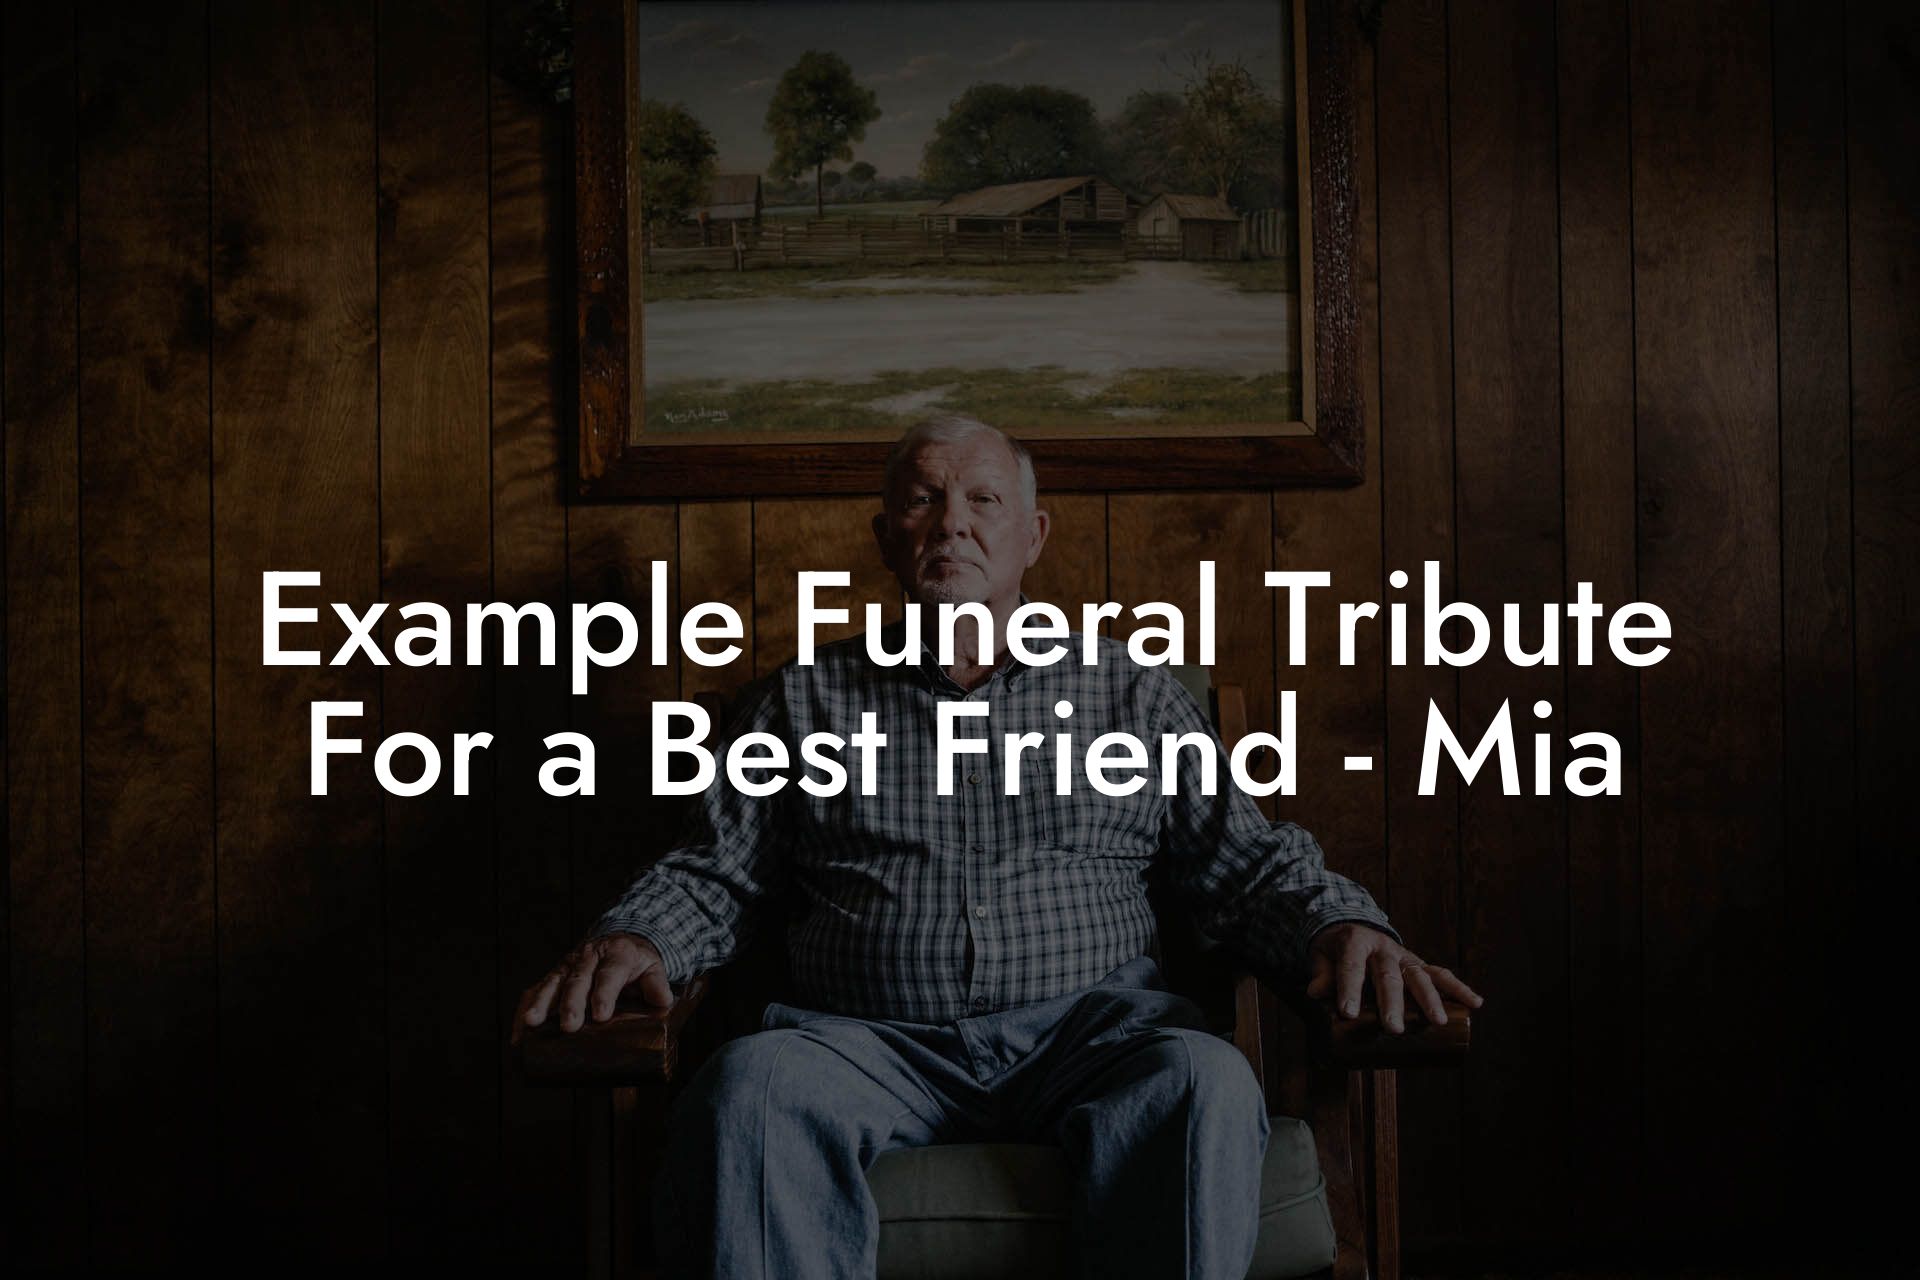 Example Funeral Tribute For a Best Friend - Mia